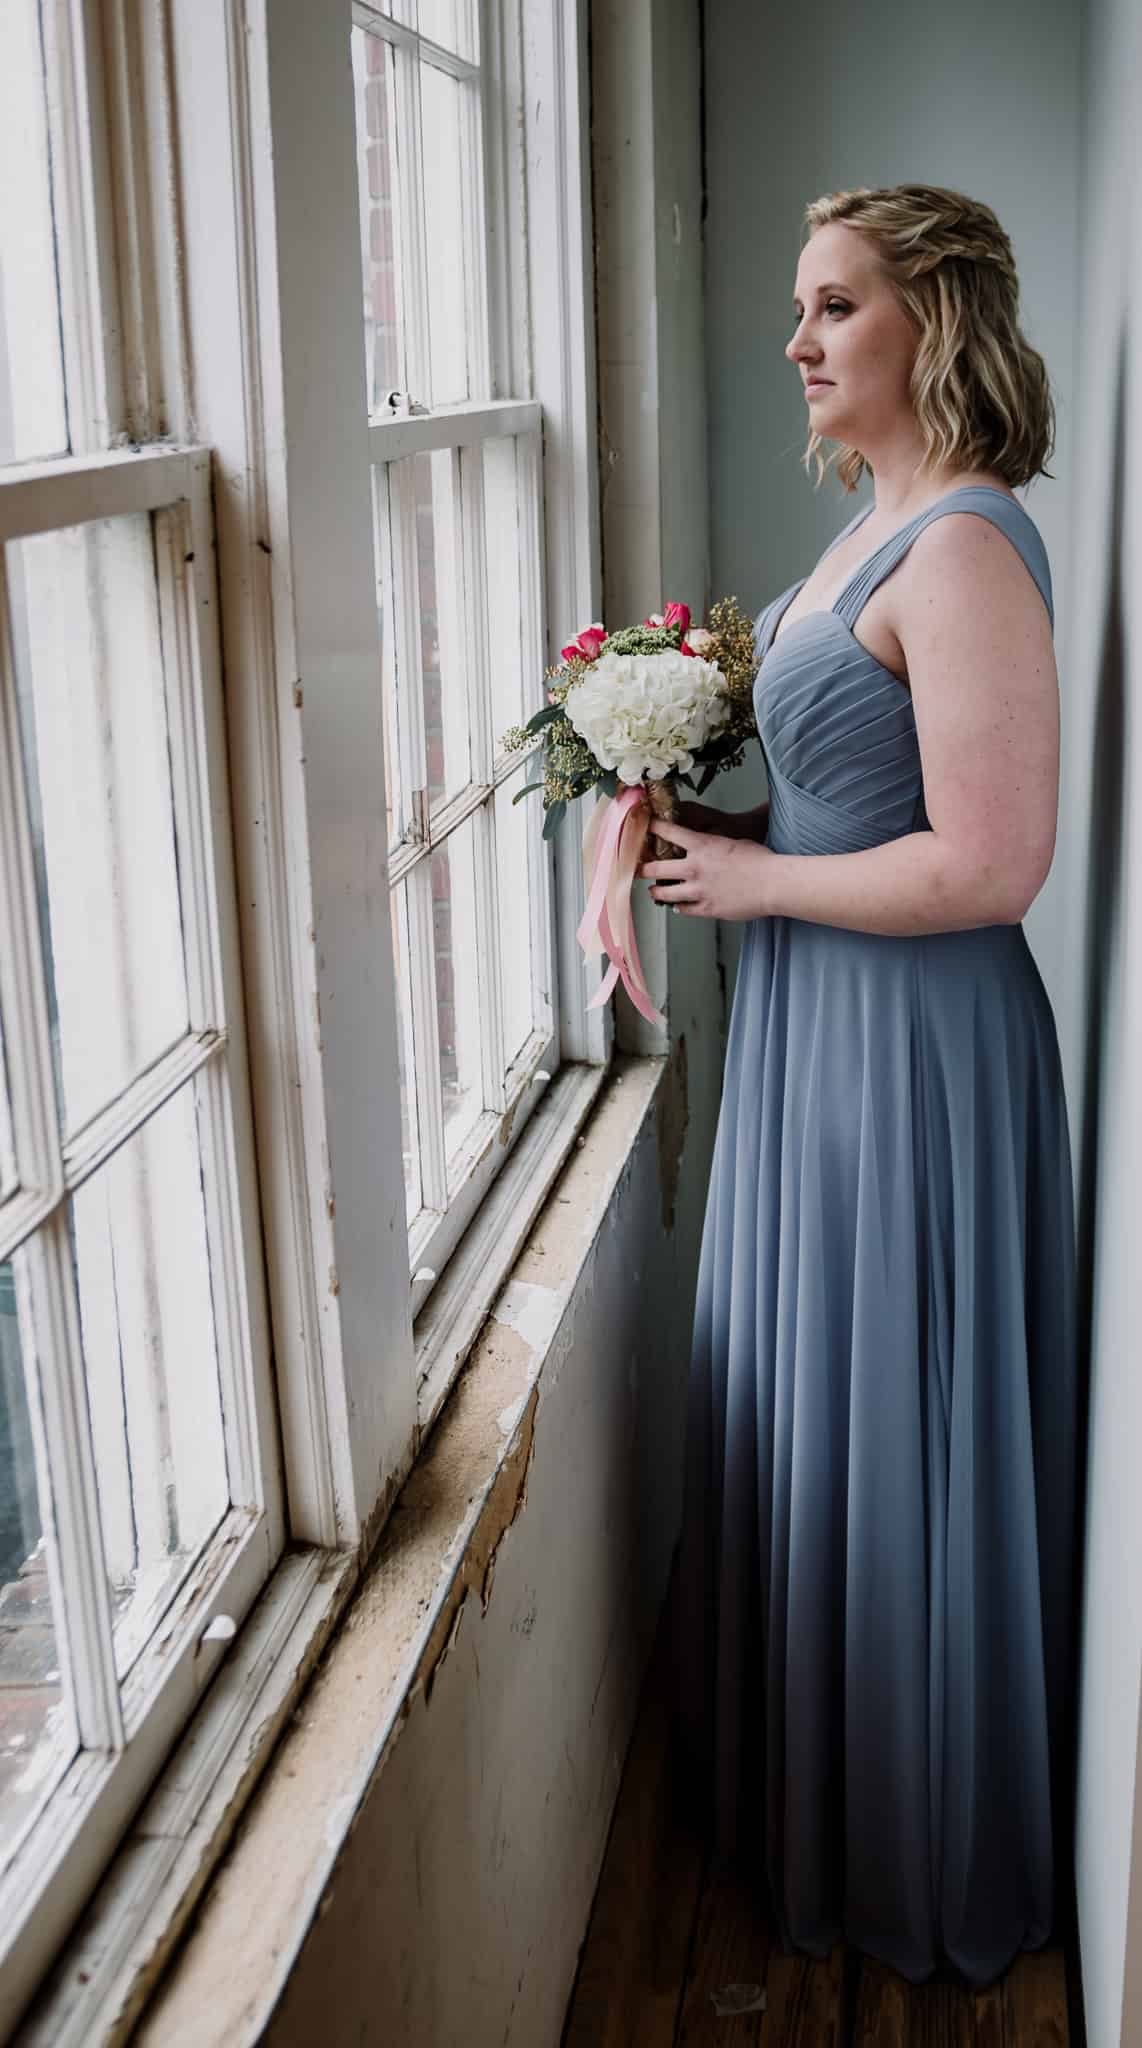 Glenwood South Tailor and Alterations - Bridesmaid - Forever Bridal Wedding Shows